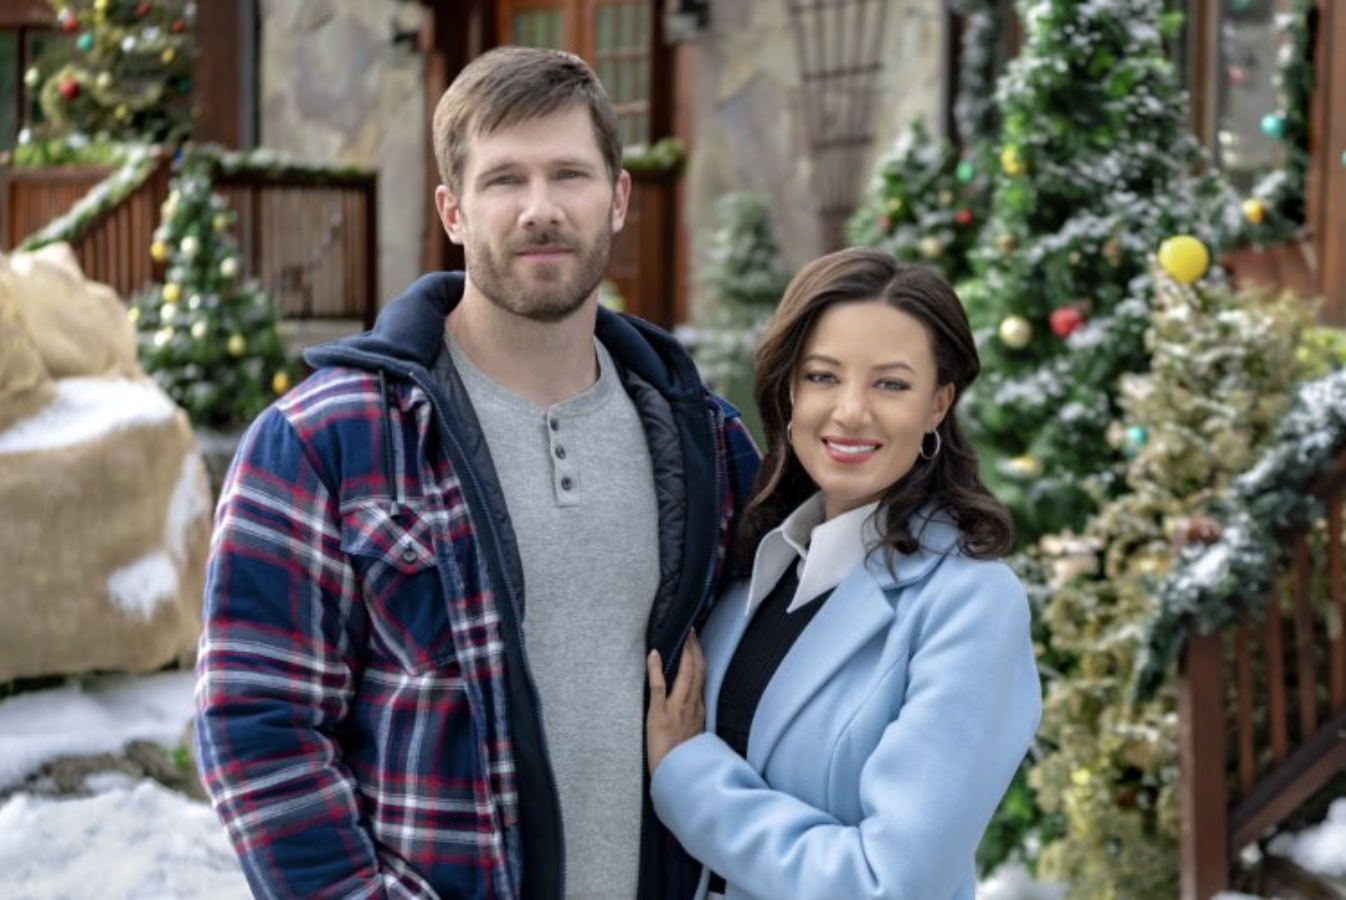 Hallmark Movies & Mysteries Original Premiere of "Christmas in My Heart" on Saturday, Oct. 23rd at 10pm/9c #MiraclesOfChristmas